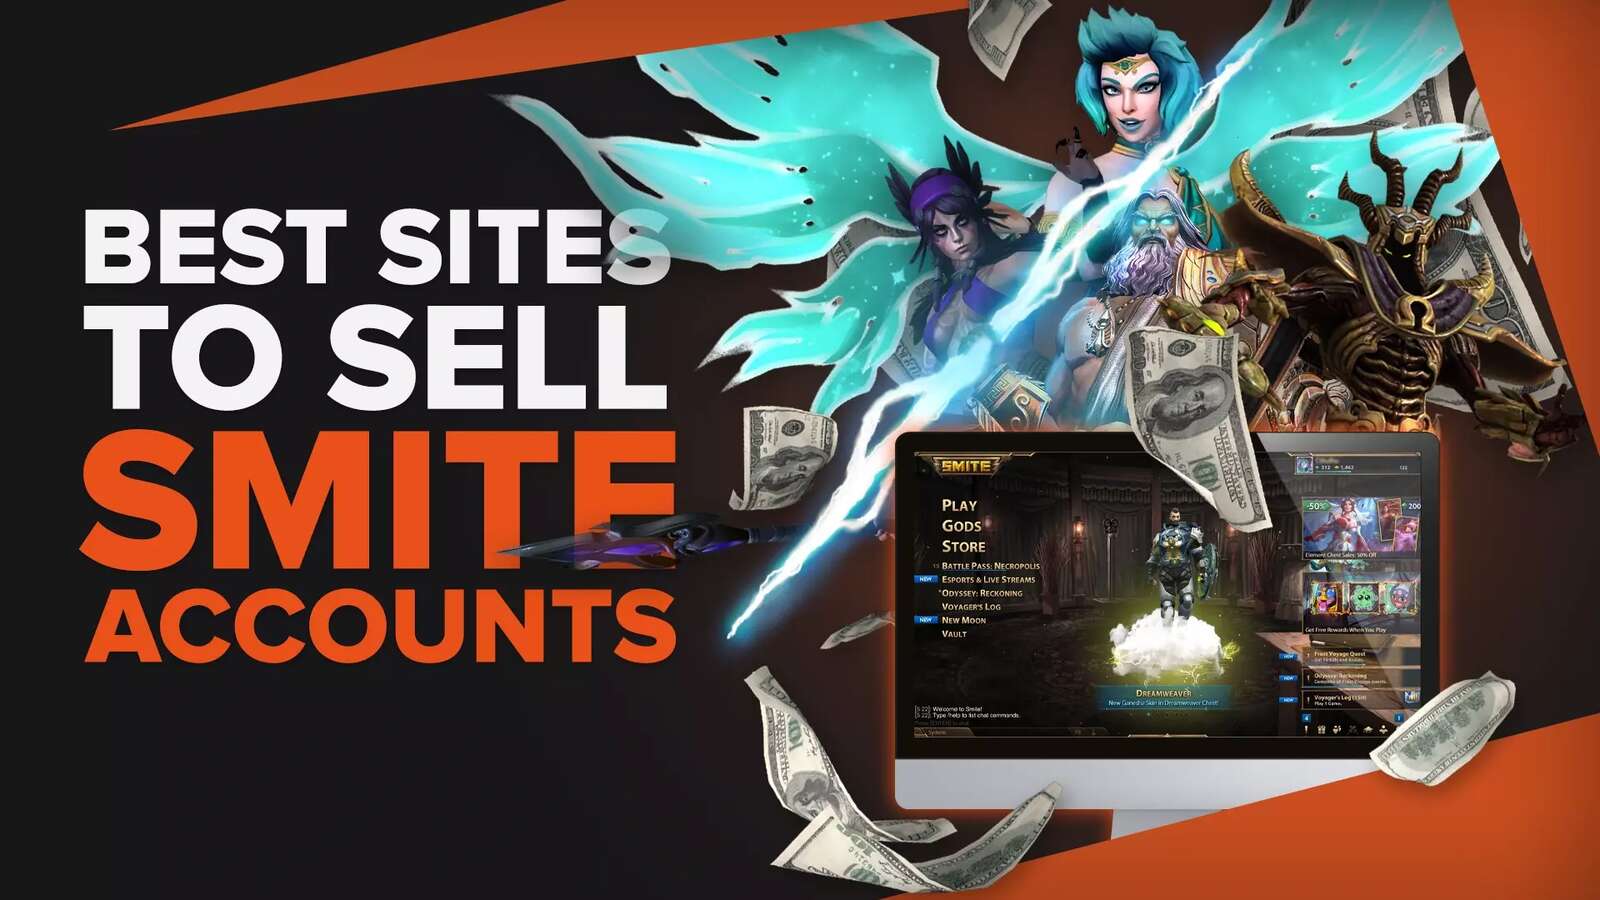 The 4 Best Sites to Sell Smite Accounts [Safe & Legit]